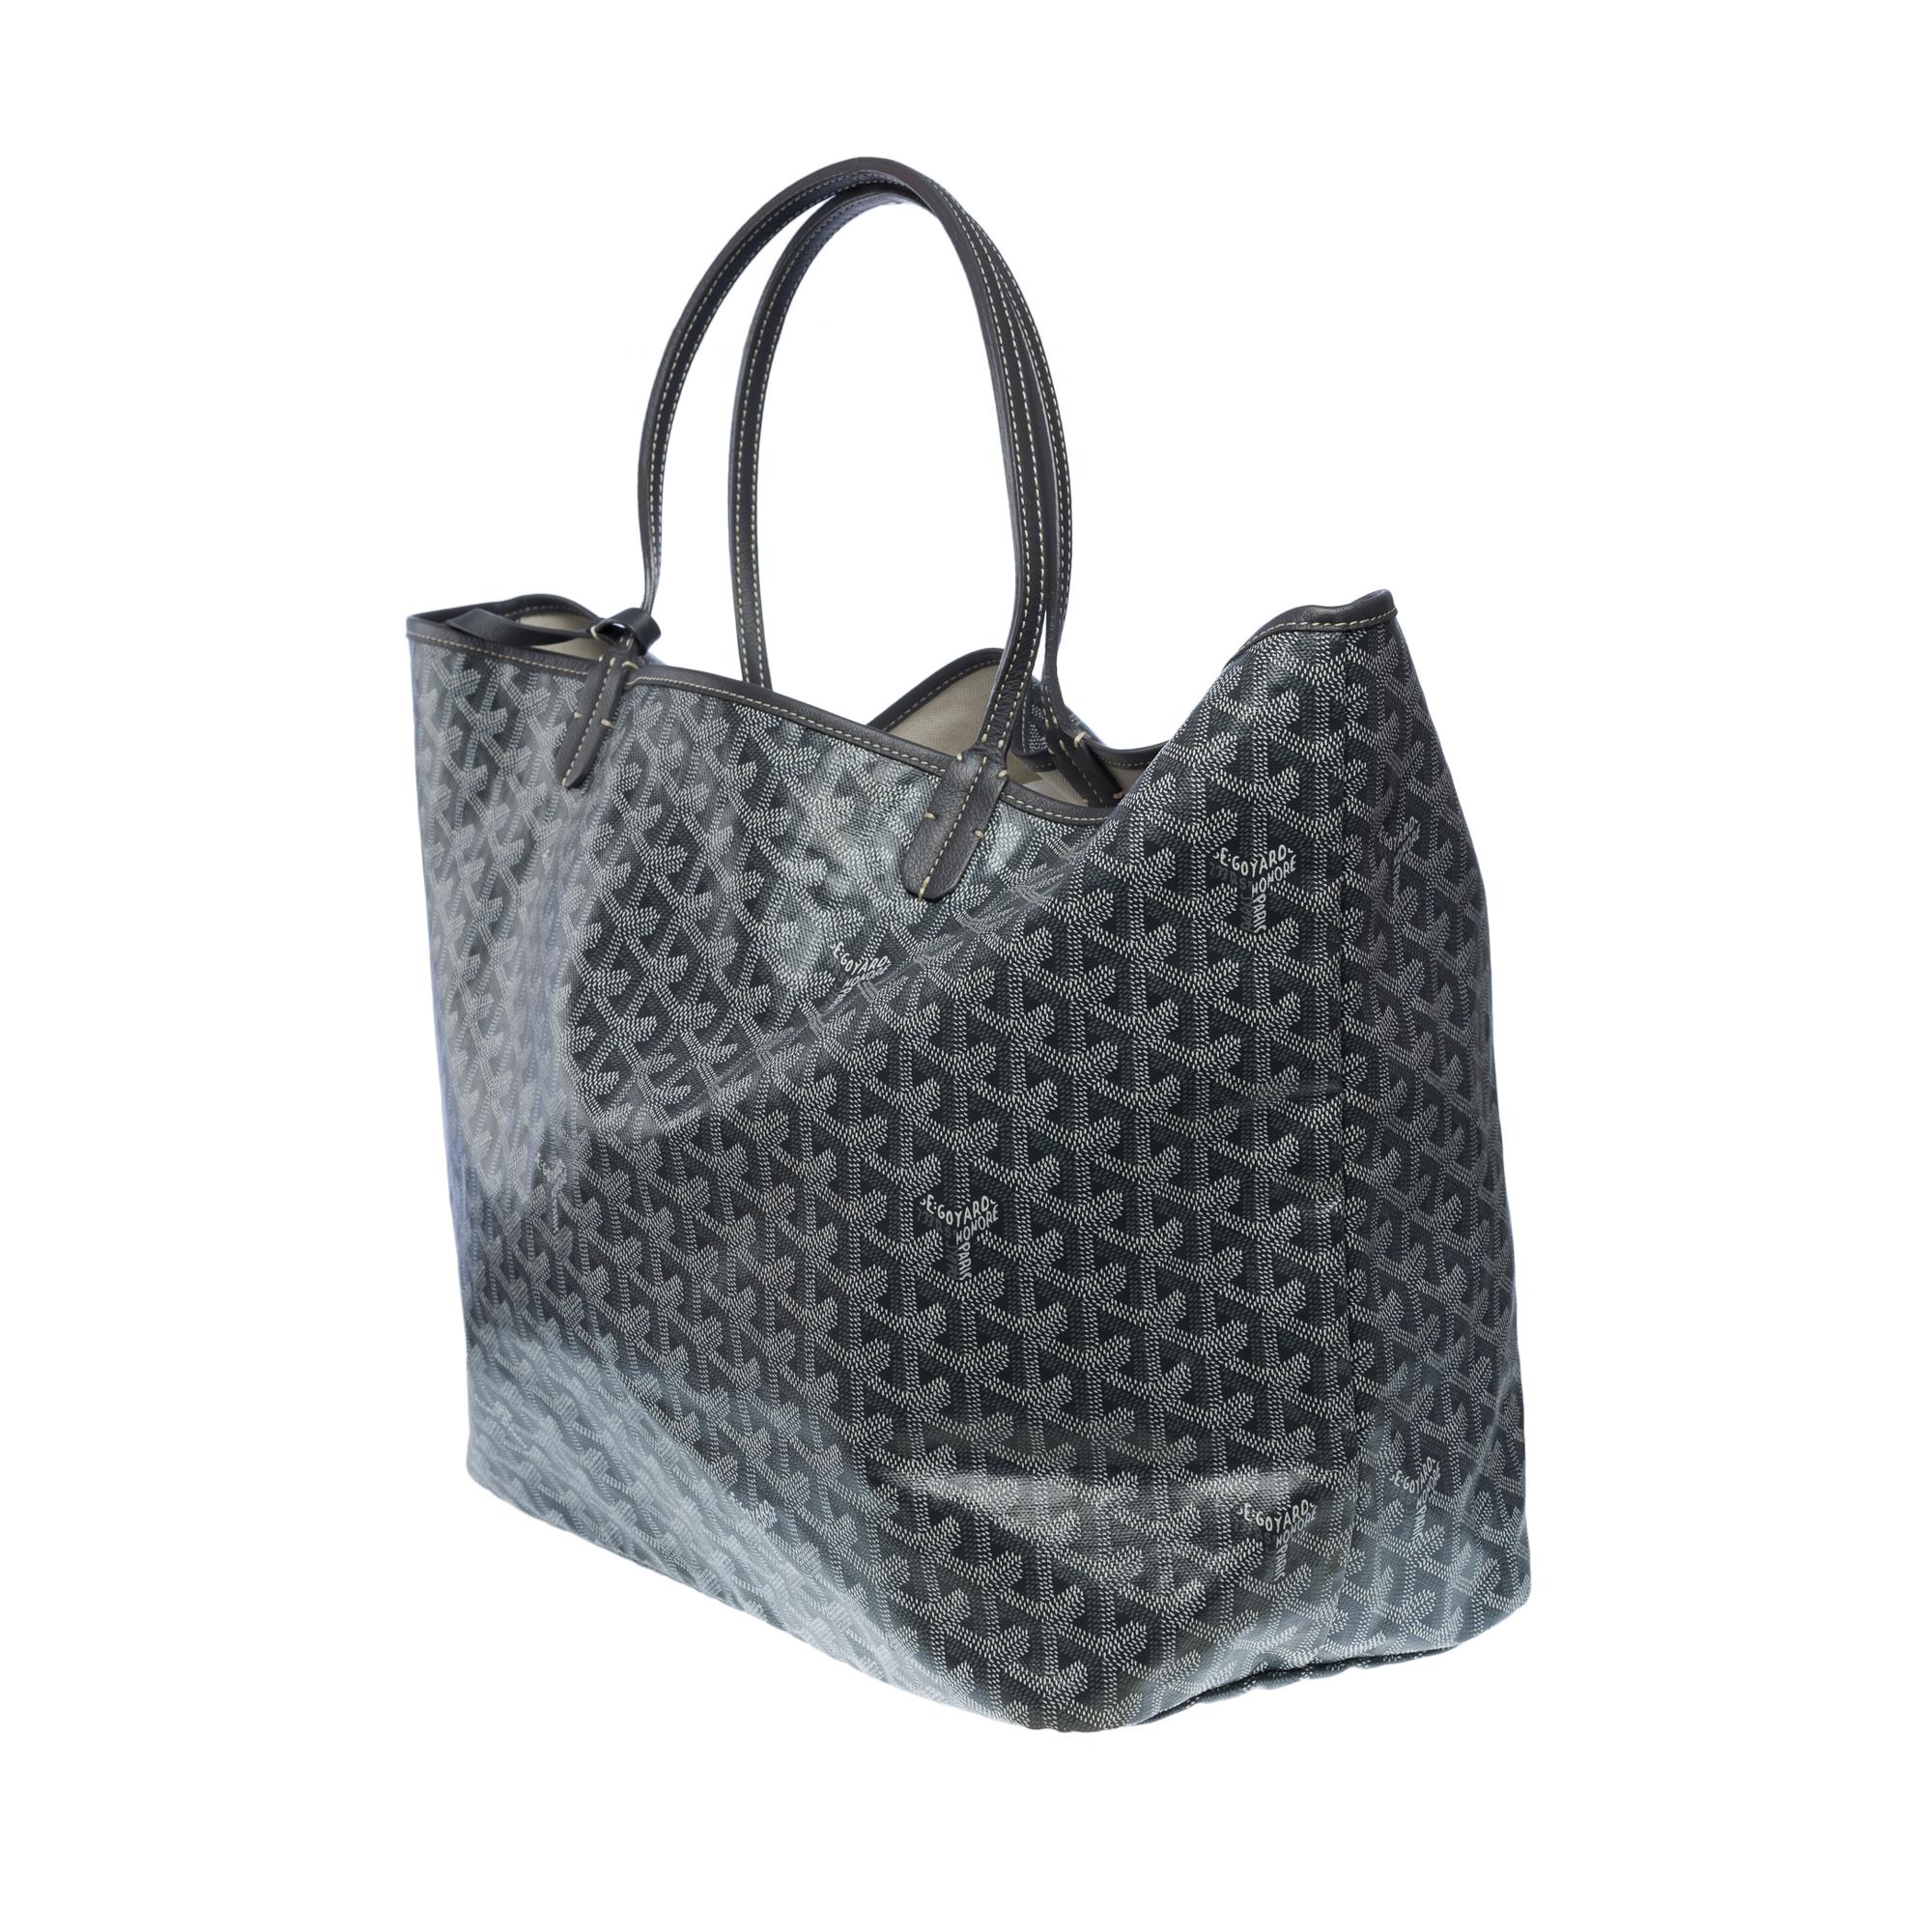 Goyard Saint-Louis GM (grand modèle) tote bag in grey and white Goyardine canvas and grey leather, silver metal hardware, double grey leather handle allowing a hand or shoulder support. 
White canvas inner lining, 1 removable matching